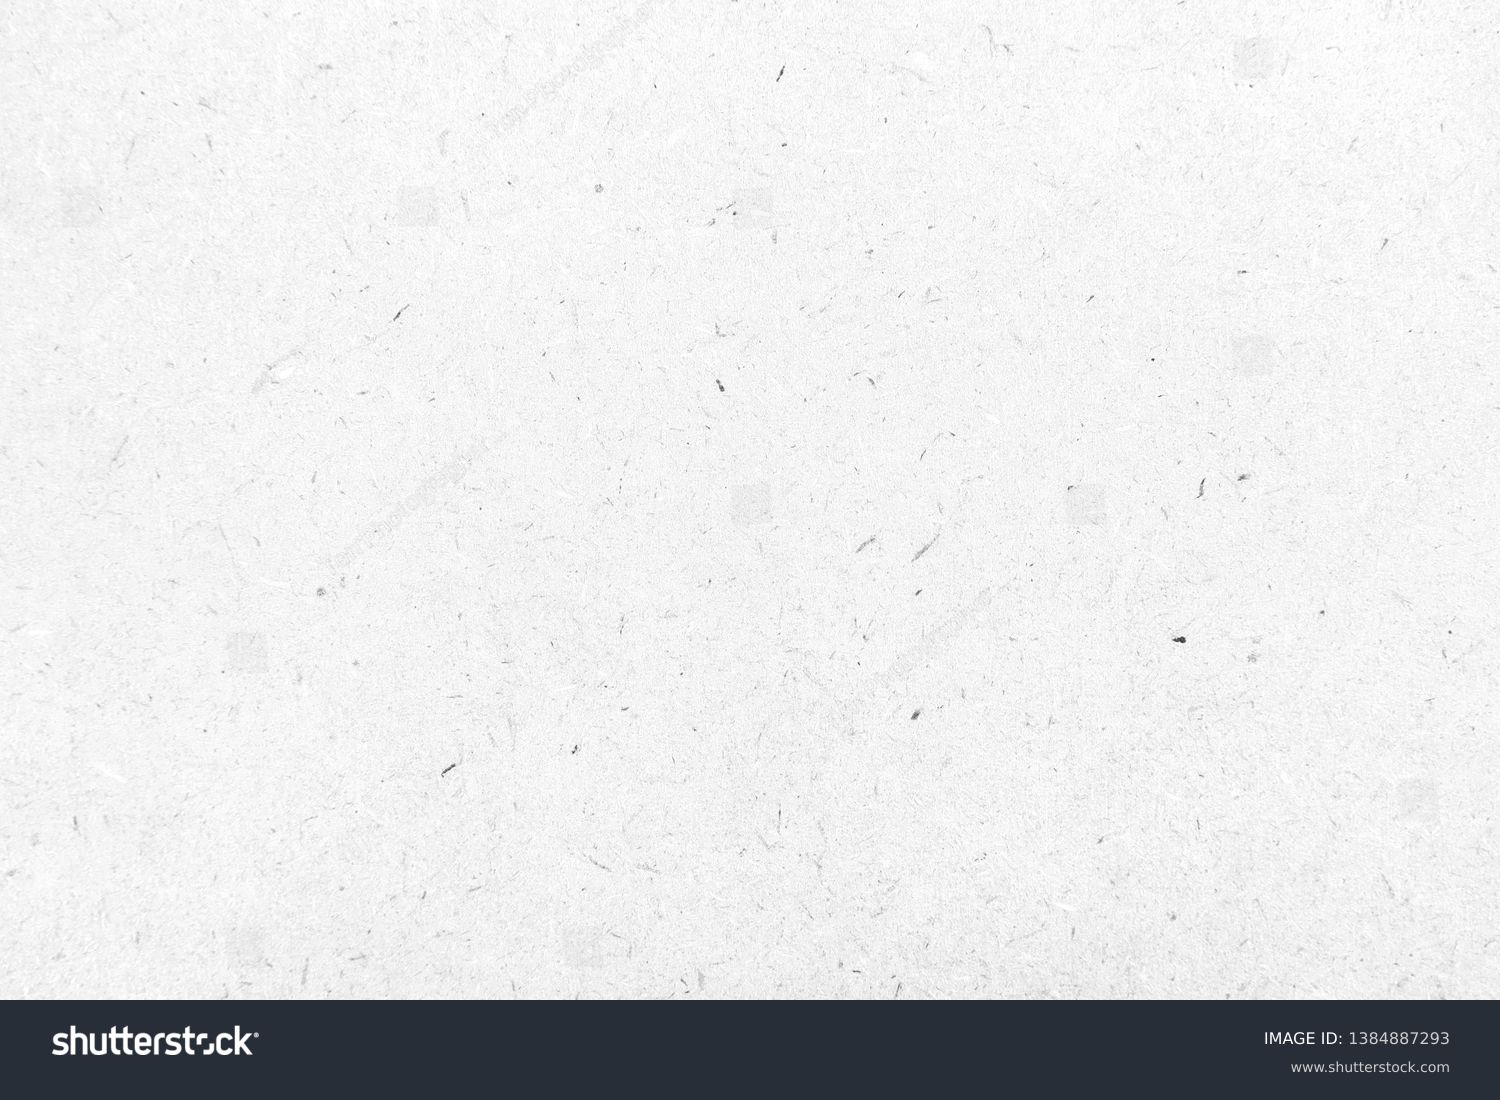 White paper texture background or cardboard surface from a paper box for packing. and for the designs decoration and nature background concept #1384887293